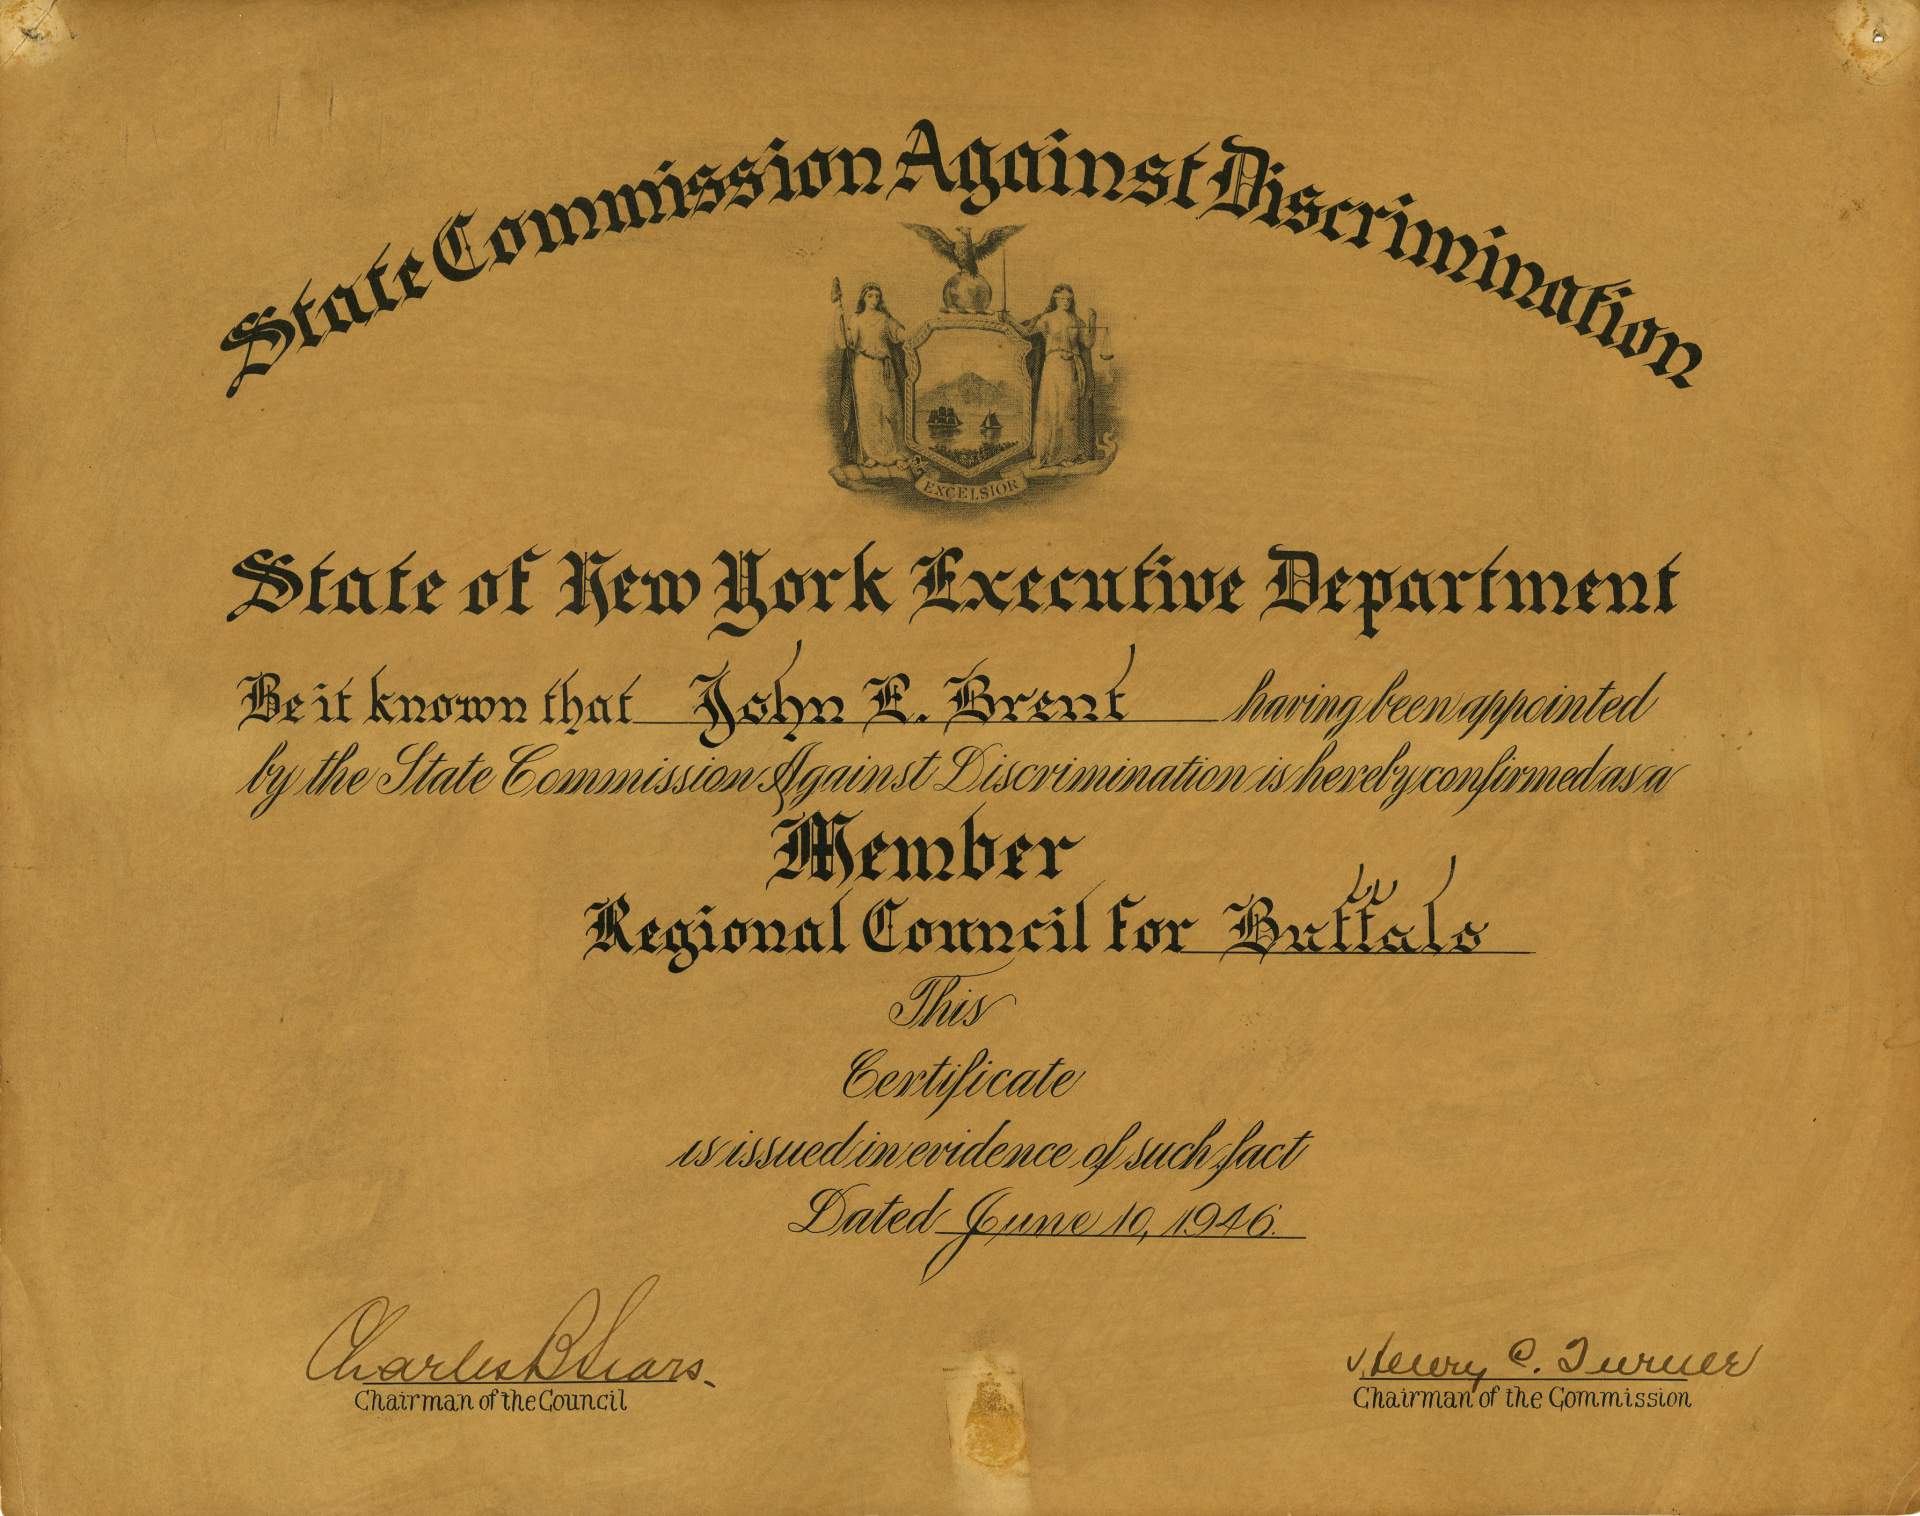 State Commission Against Discrimination, Regional Council for Buffalo Membership Certificate issued by the State of New York Executive Department